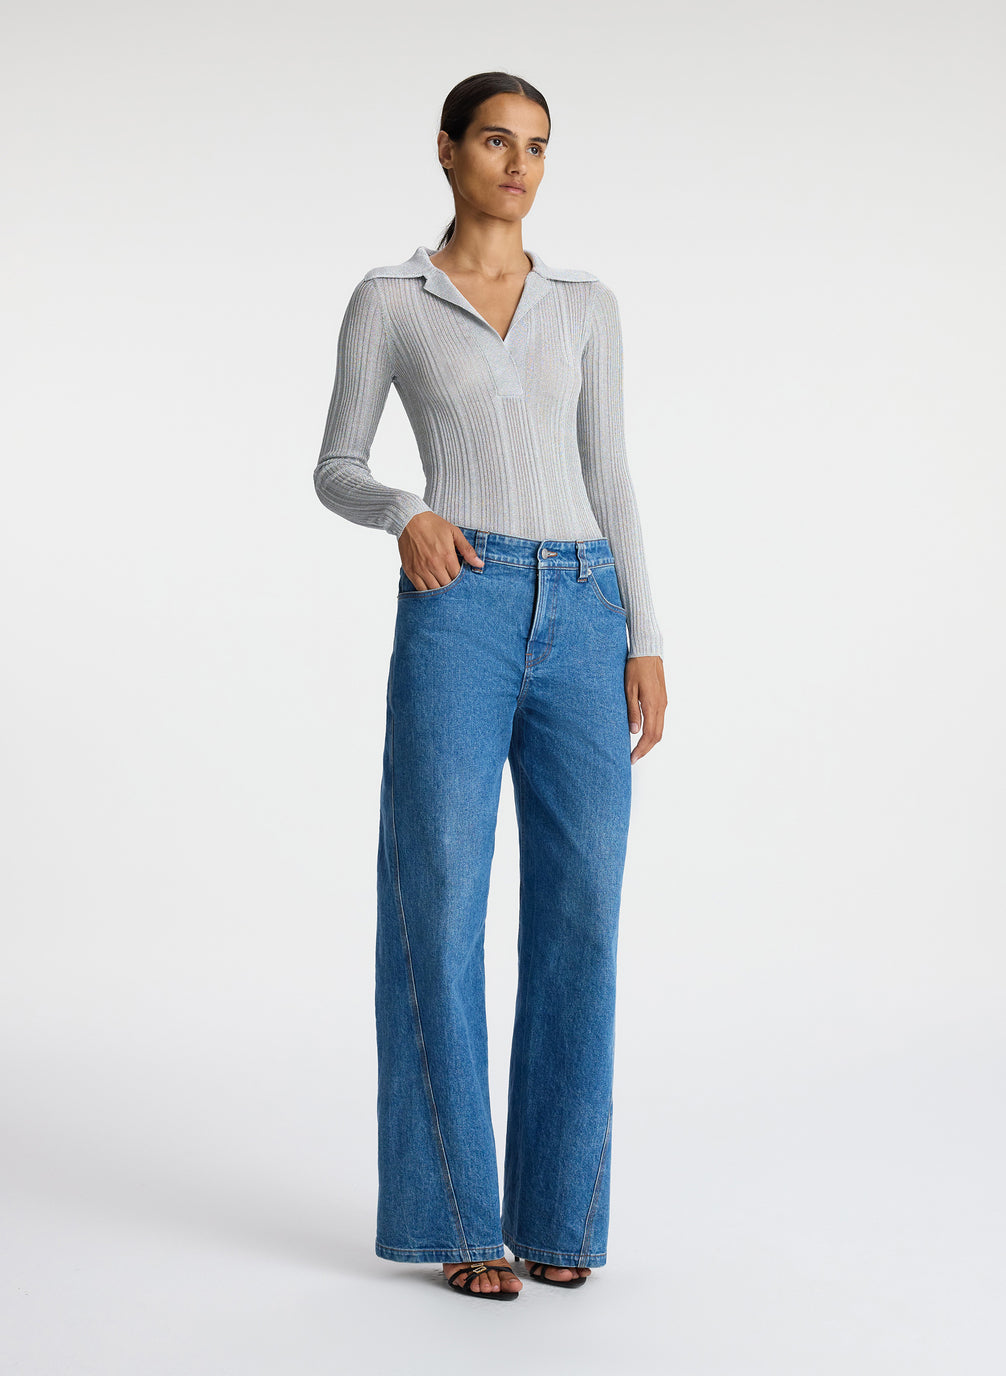 front view of woman in silver long sleeve top and medium blue wash jeans